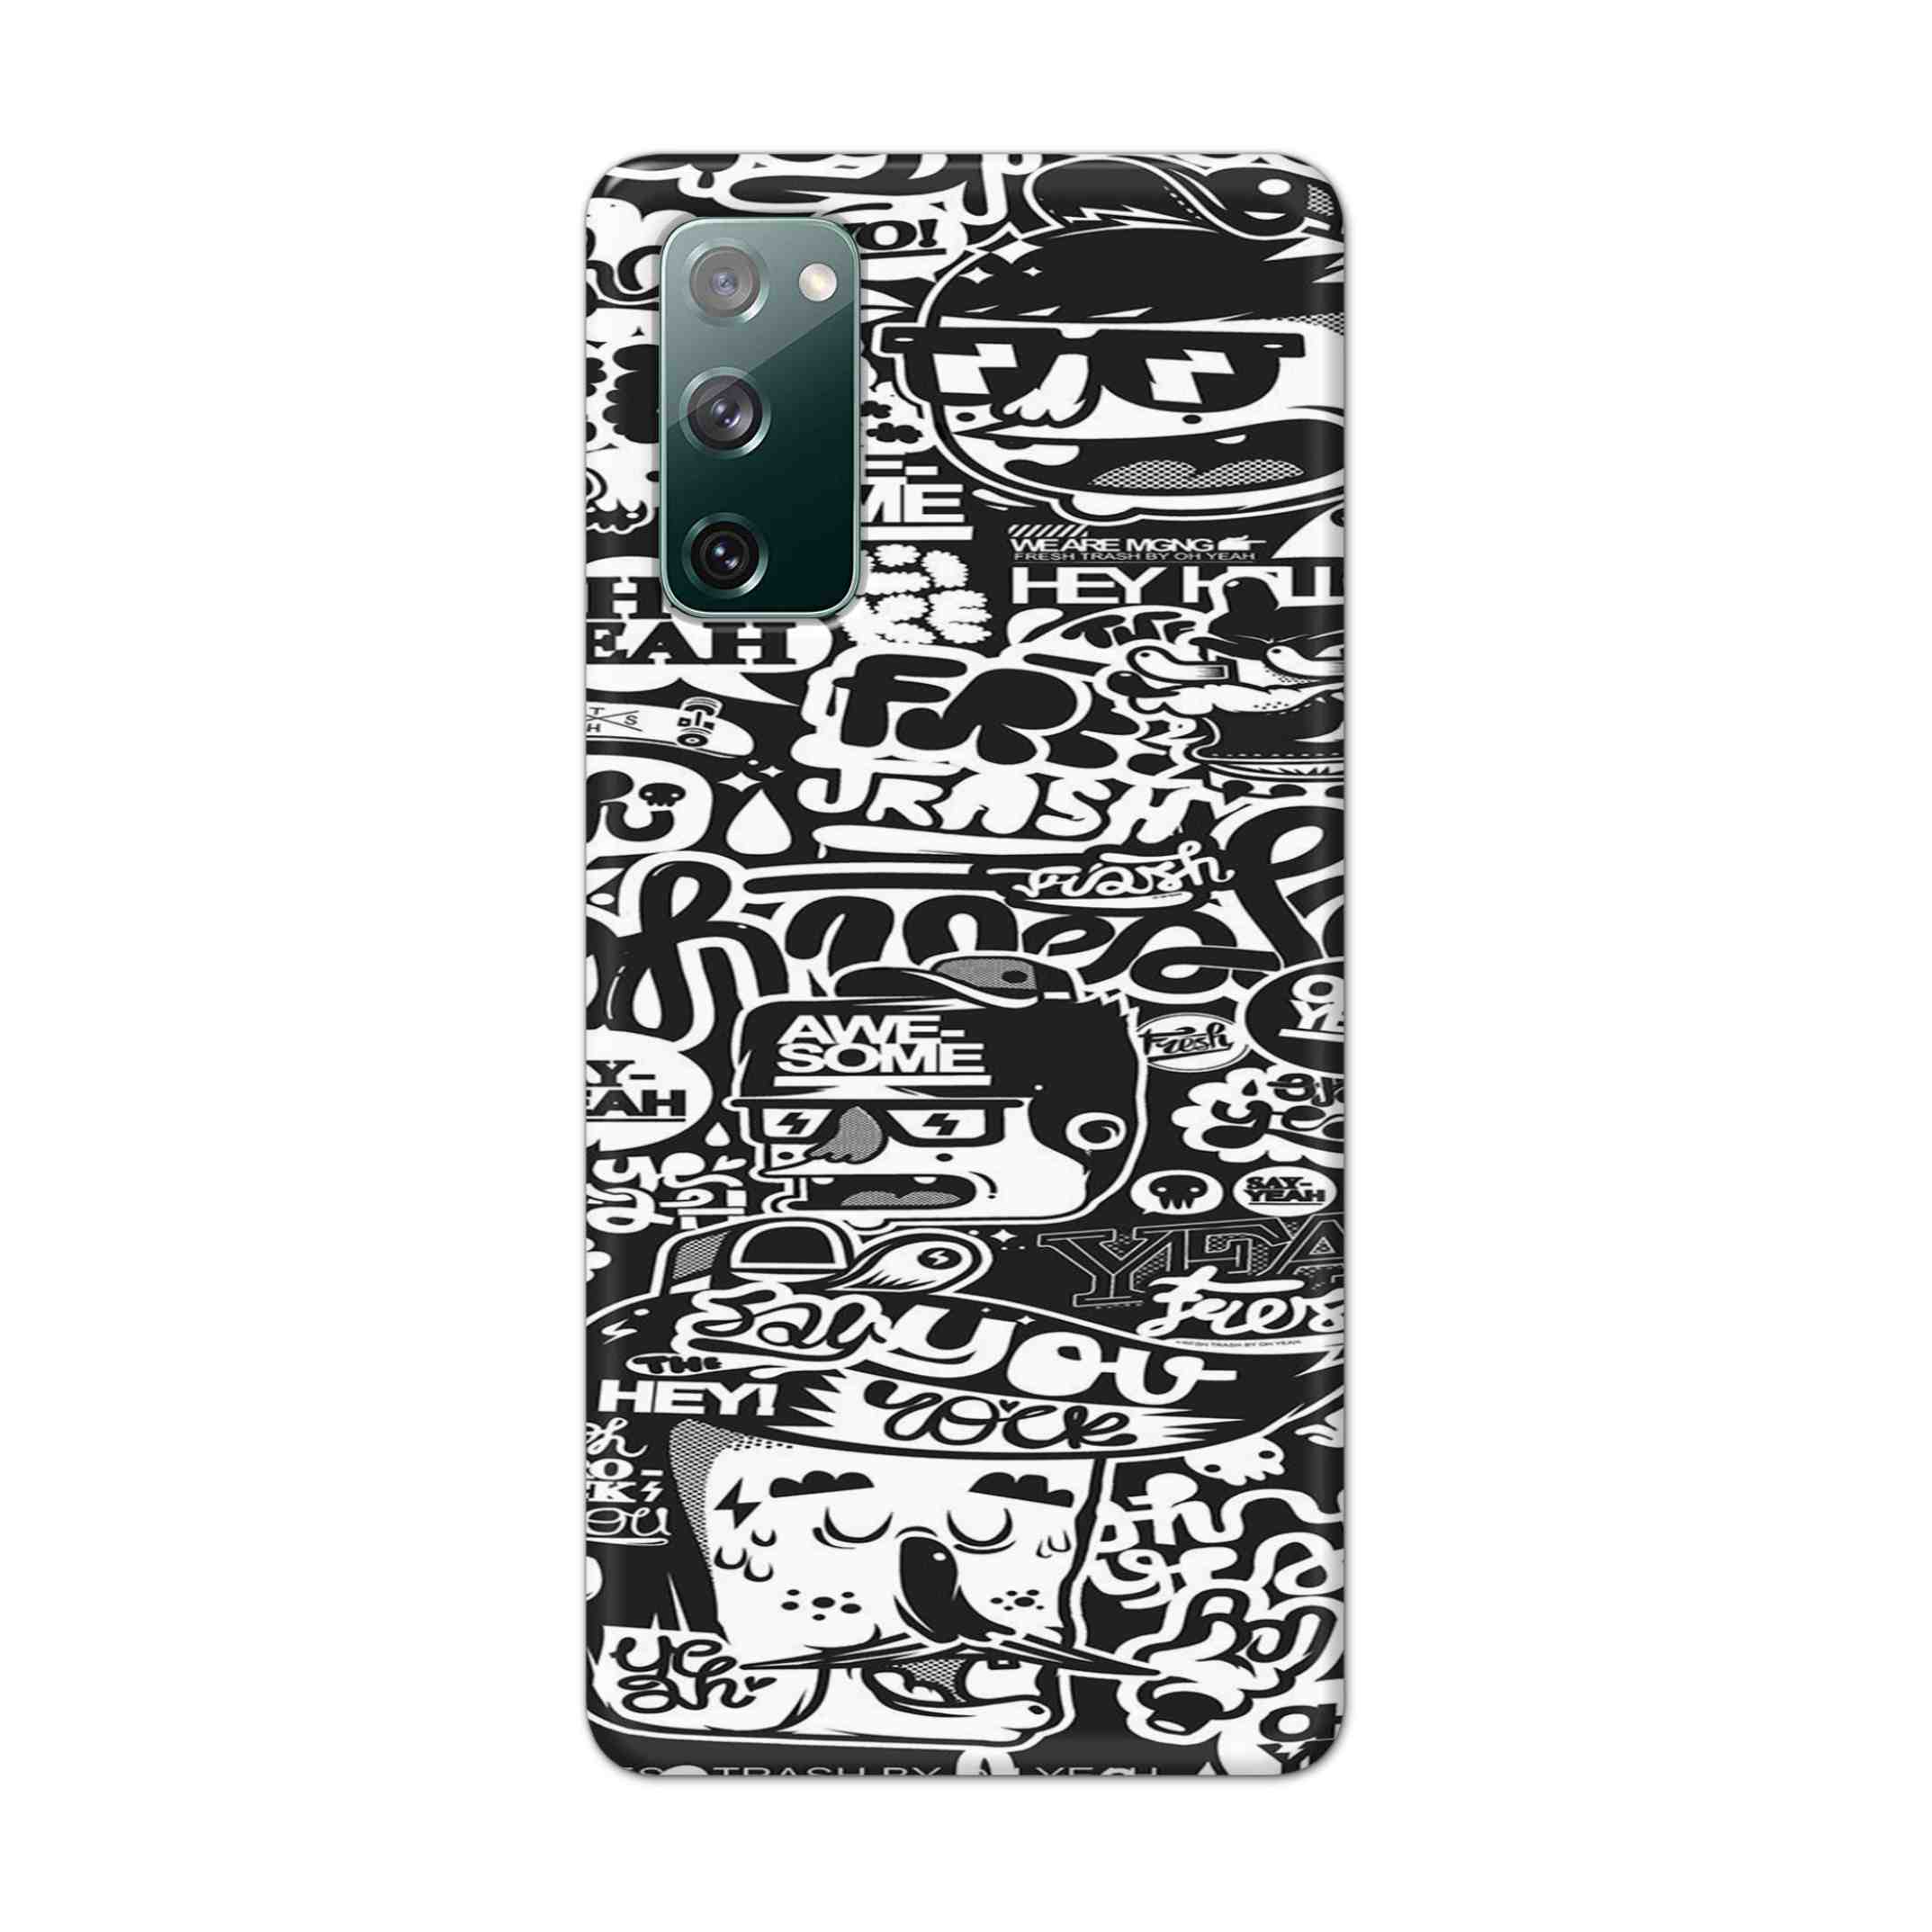 Buy Awesome Hard Back Mobile Phone Case Cover For Samsung Galaxy S20 FE Online